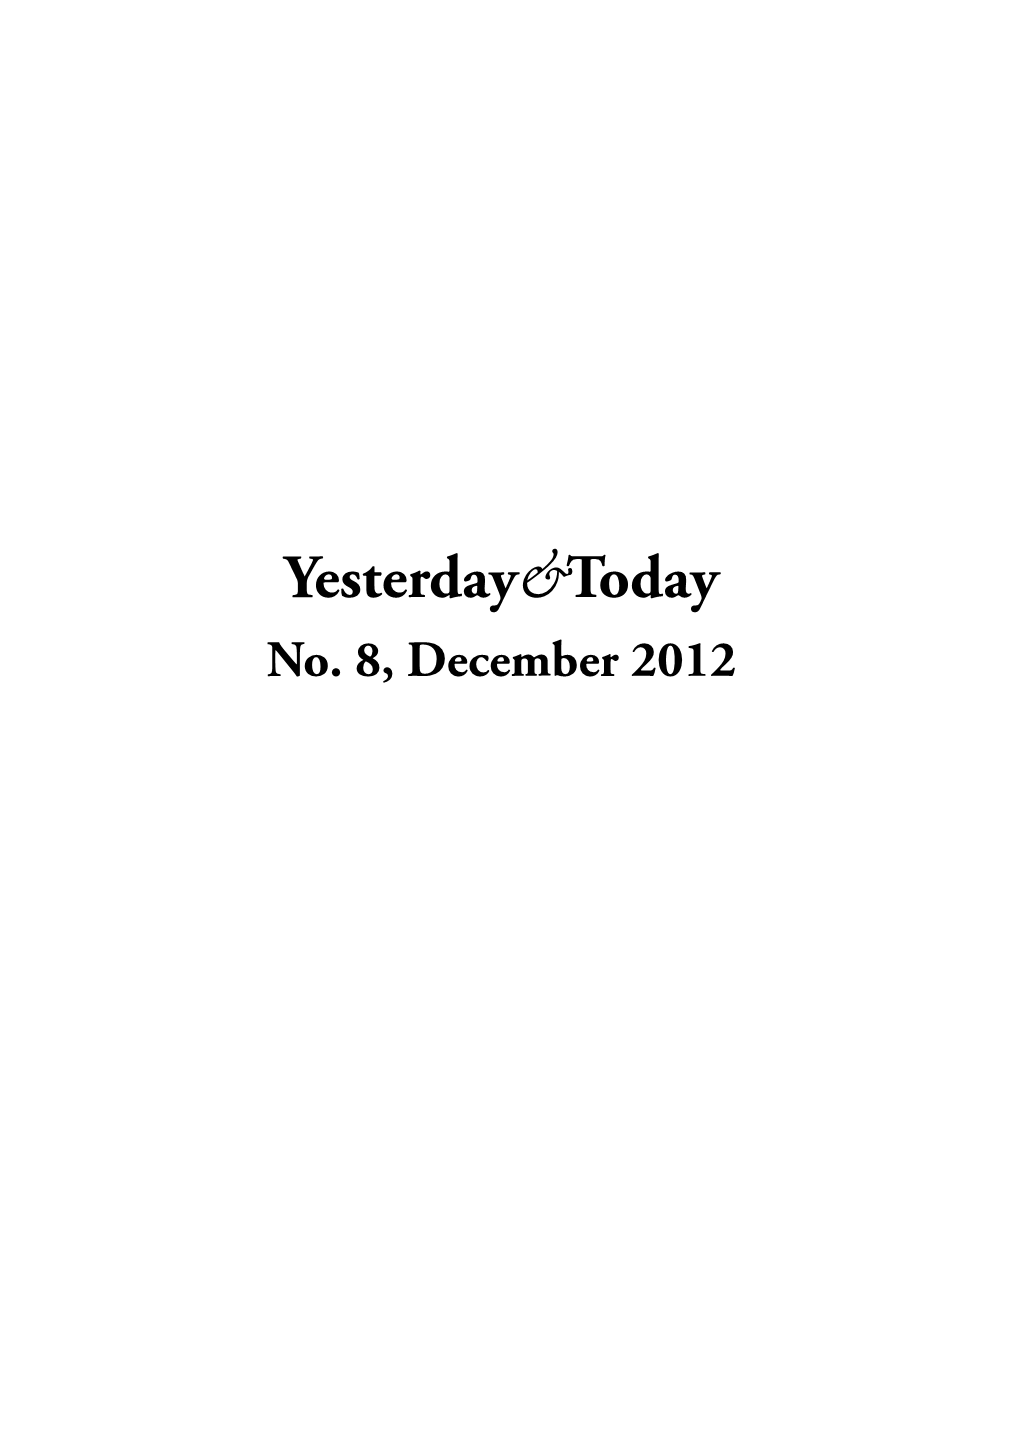 Yesterday & Today Journal No.8 DEC 2012